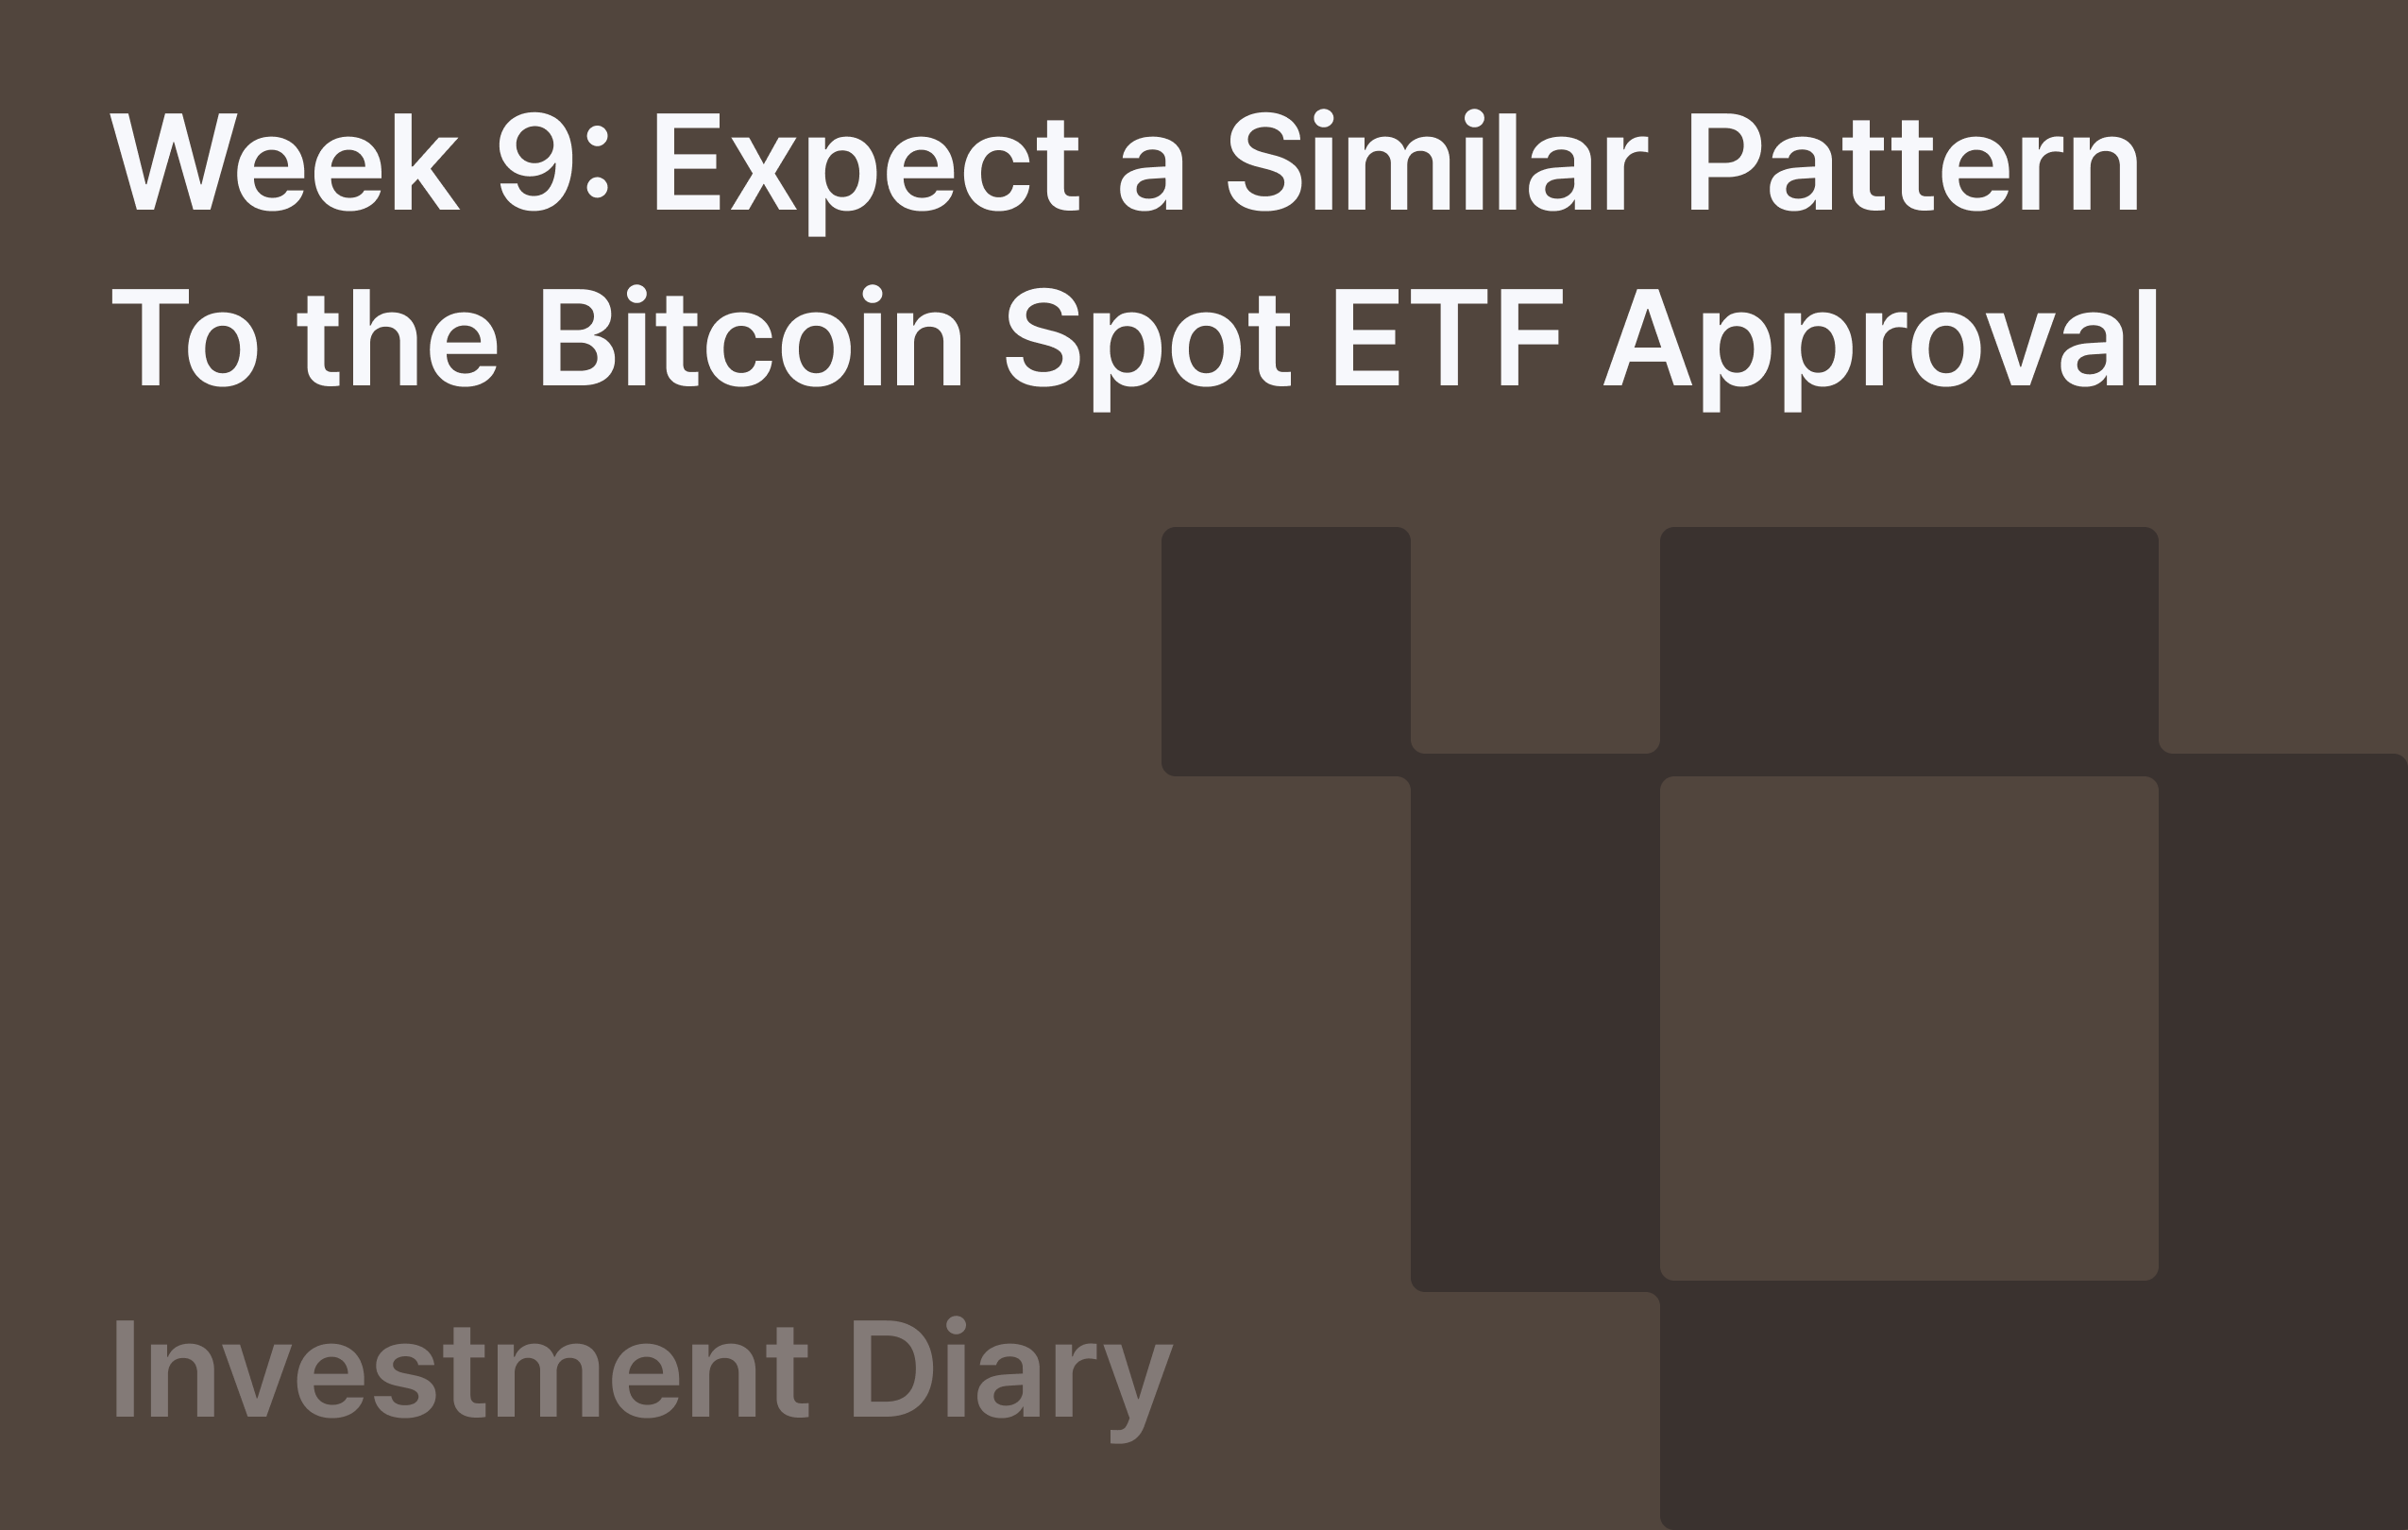 Week 9: Expect a Similar Pattern To the Bitcoin Spot ETF Approval